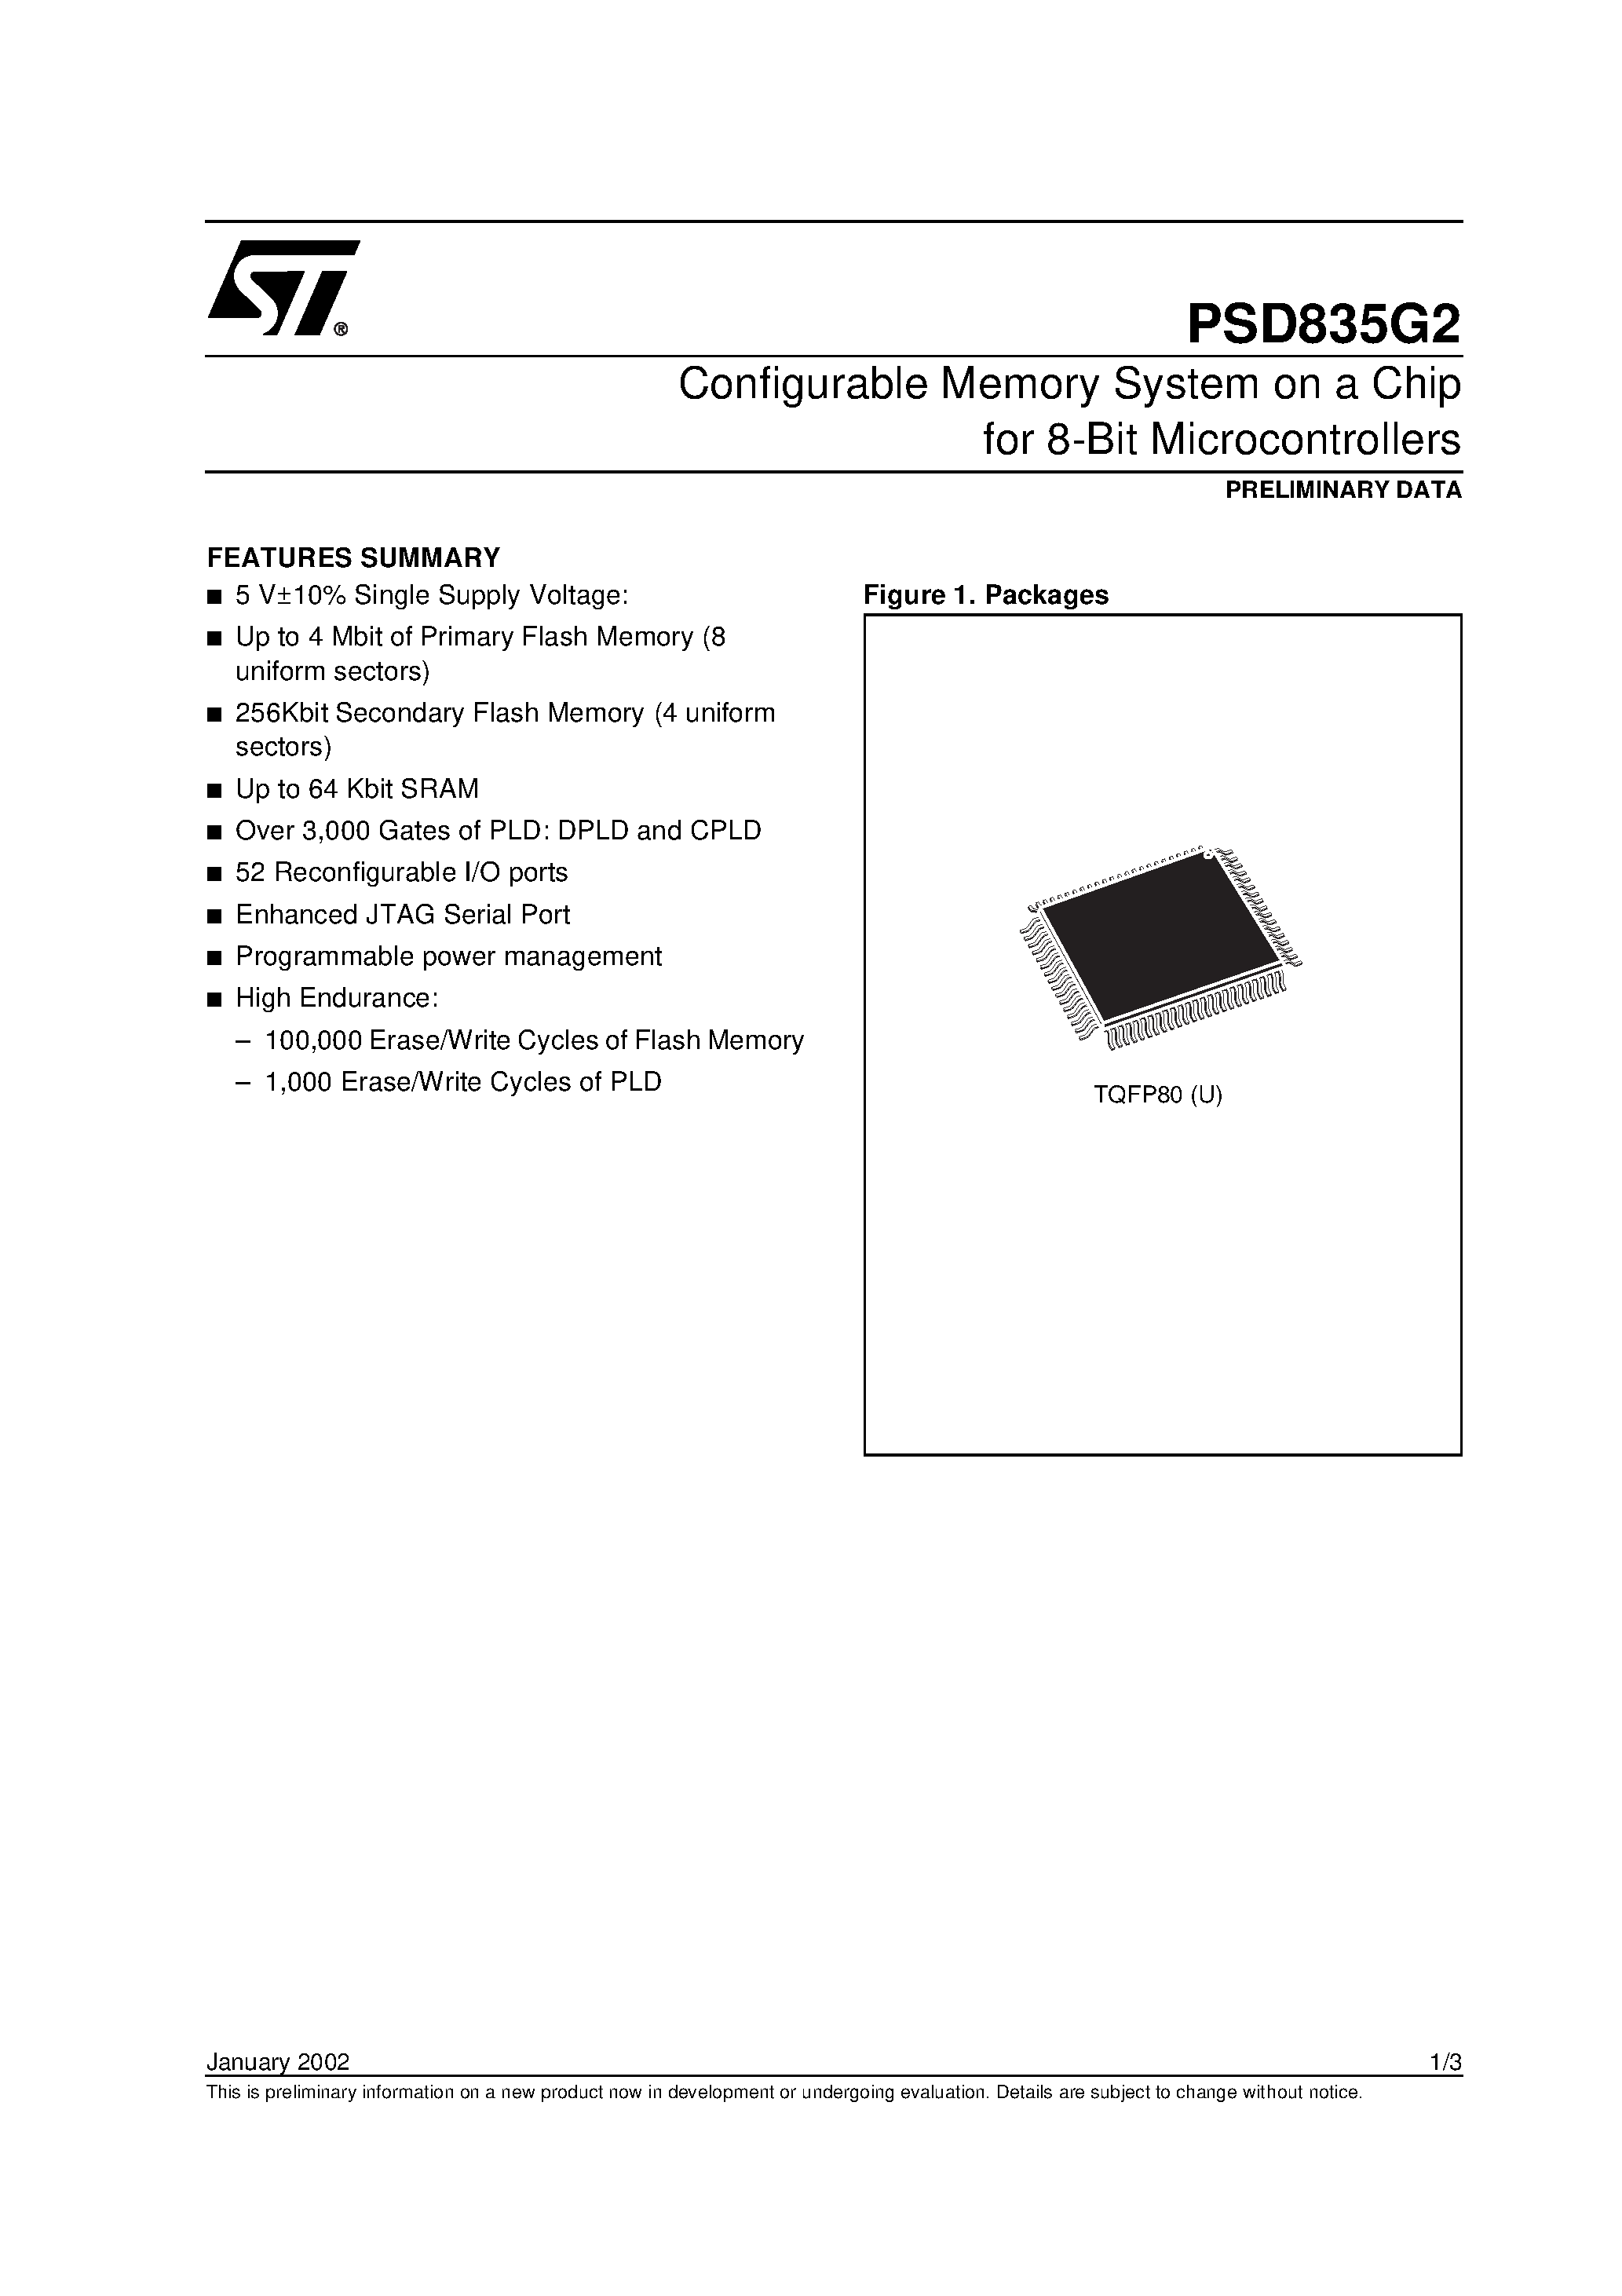 Datasheet PSD835F1V-A-15J - Configurable Memory System on a Chip for 8-Bit Microcontrollers page 1